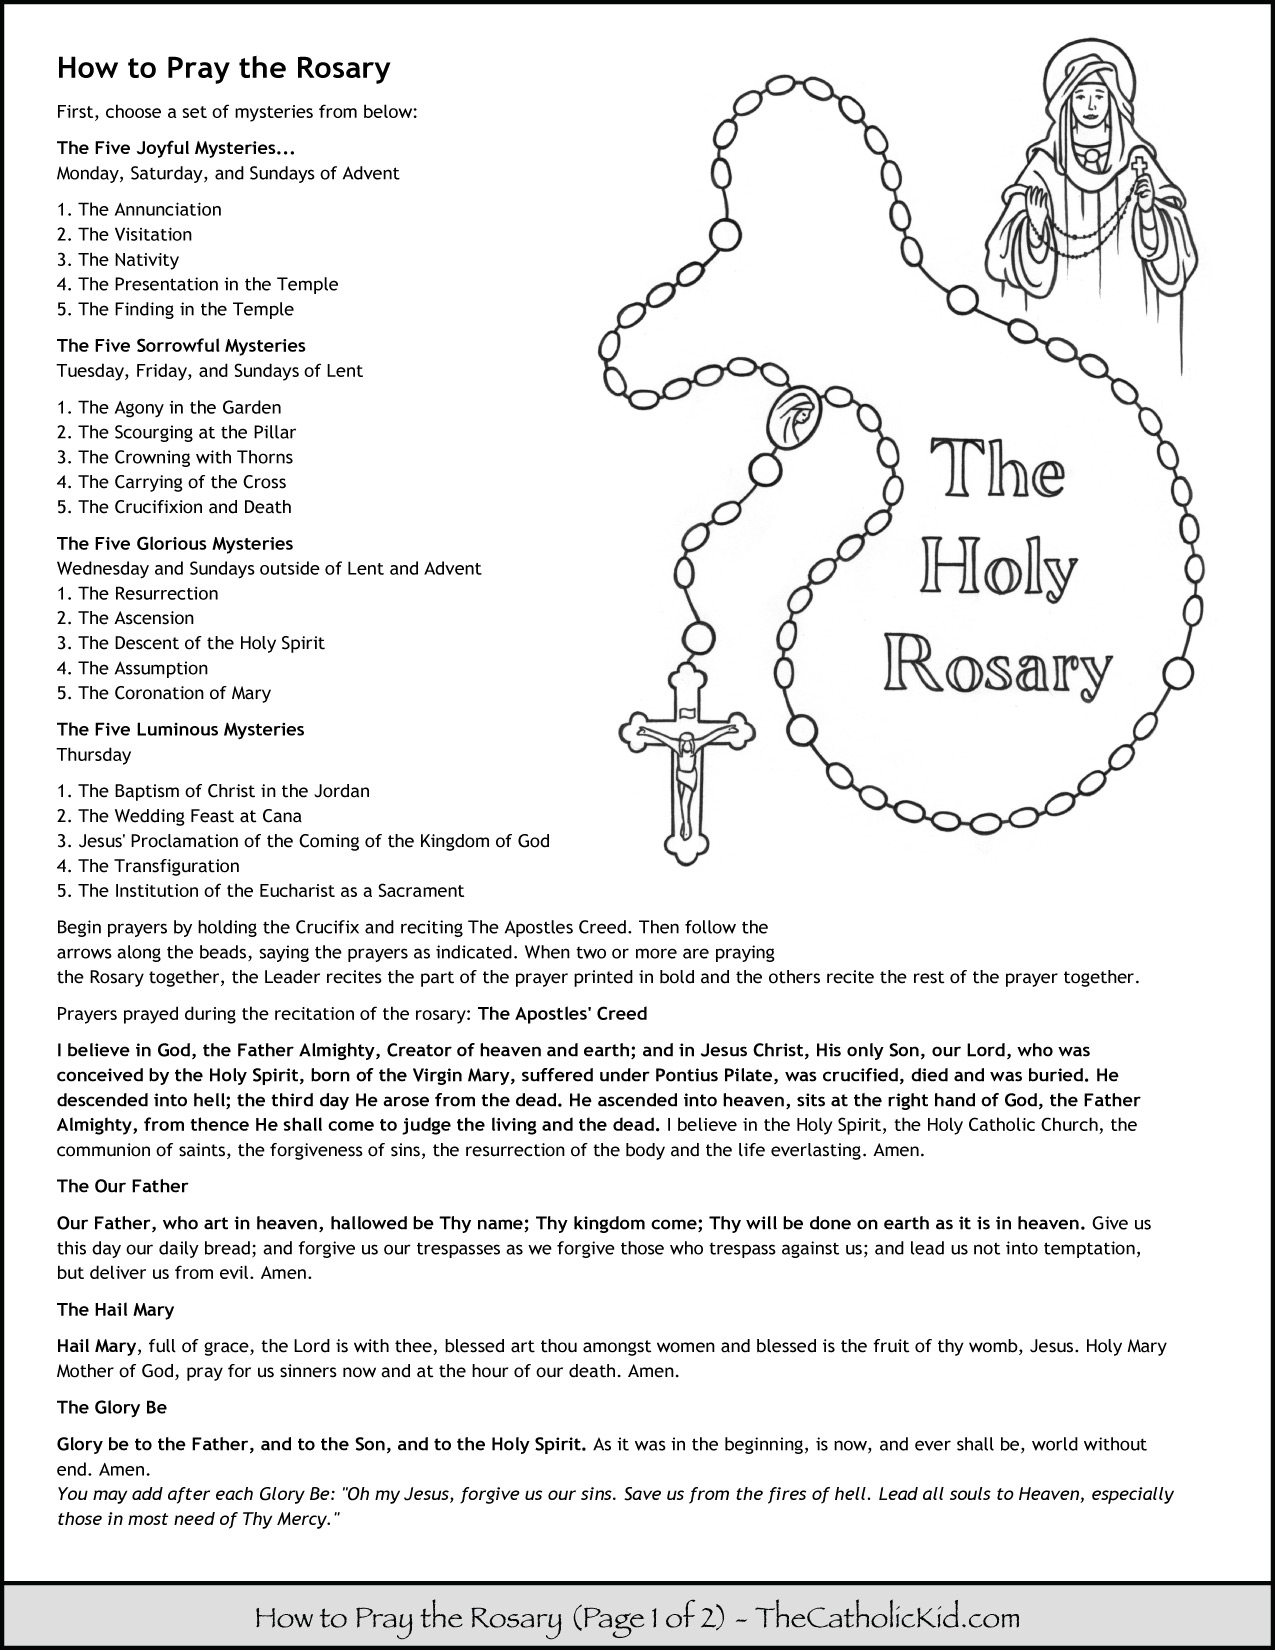 How To Pray The Rosary Coloring Page For Kids - Thecatholickid | Free Printable Rosary Worksheets